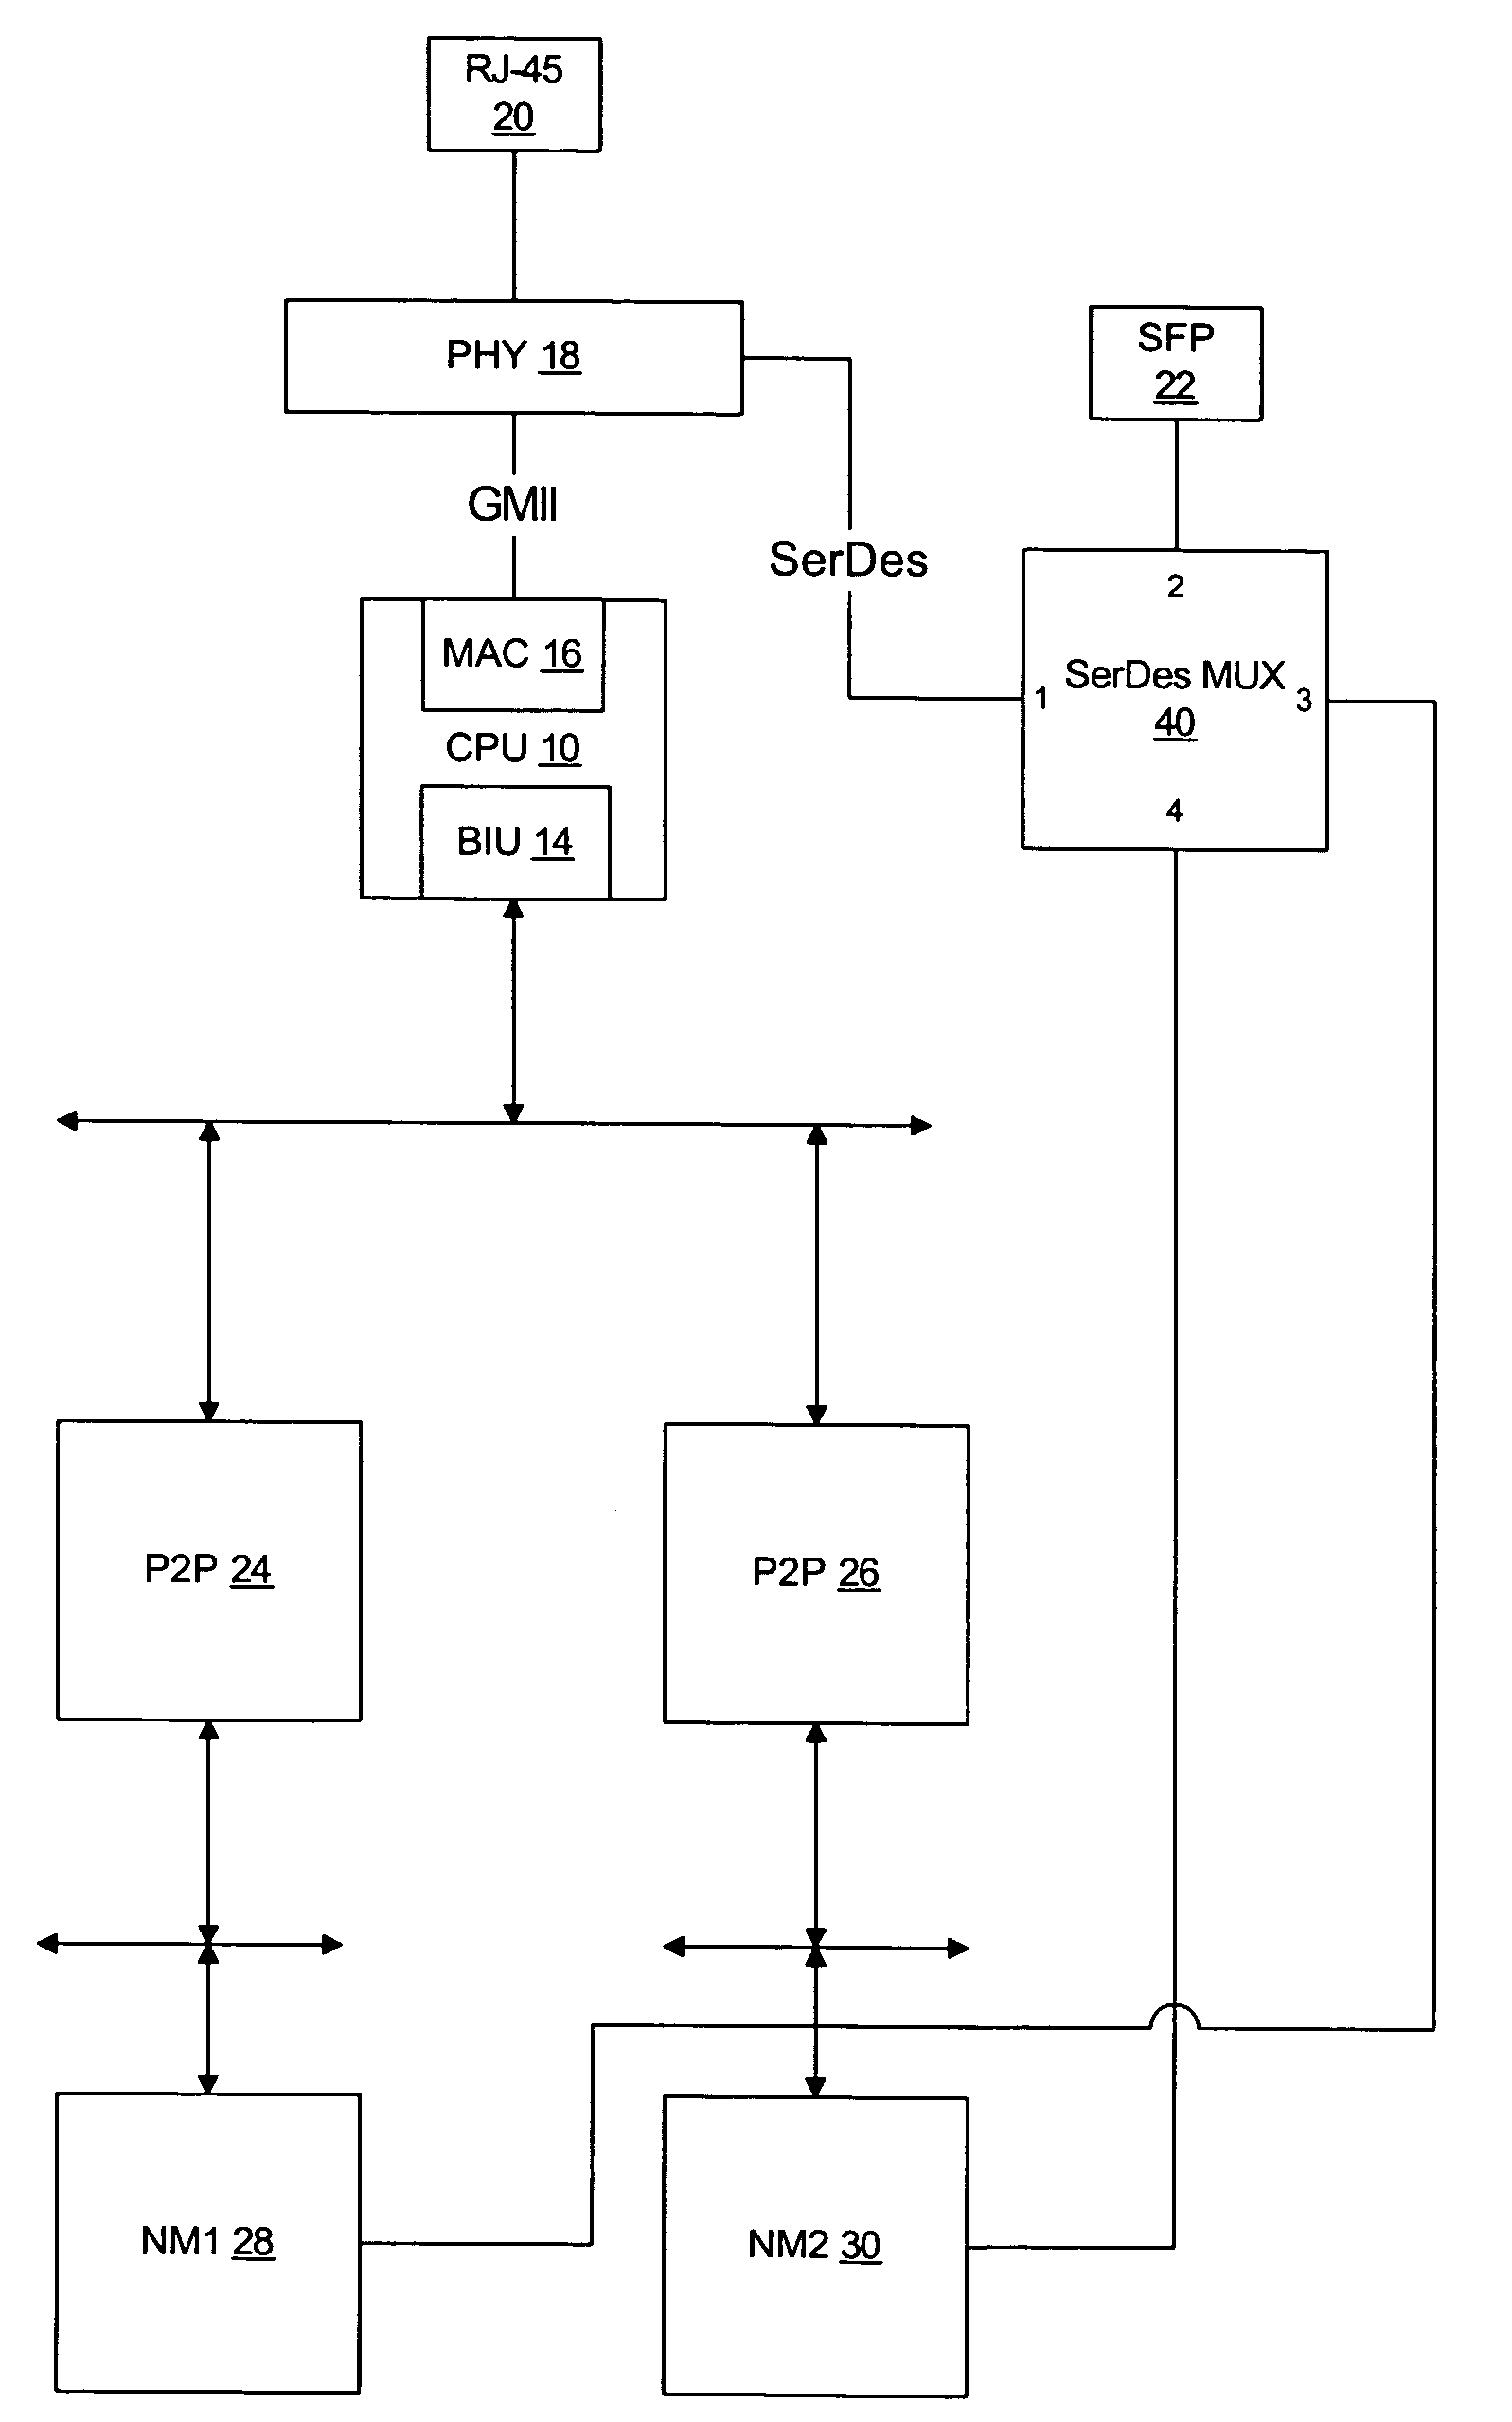 Configurable high-speed serial links between components of a network device